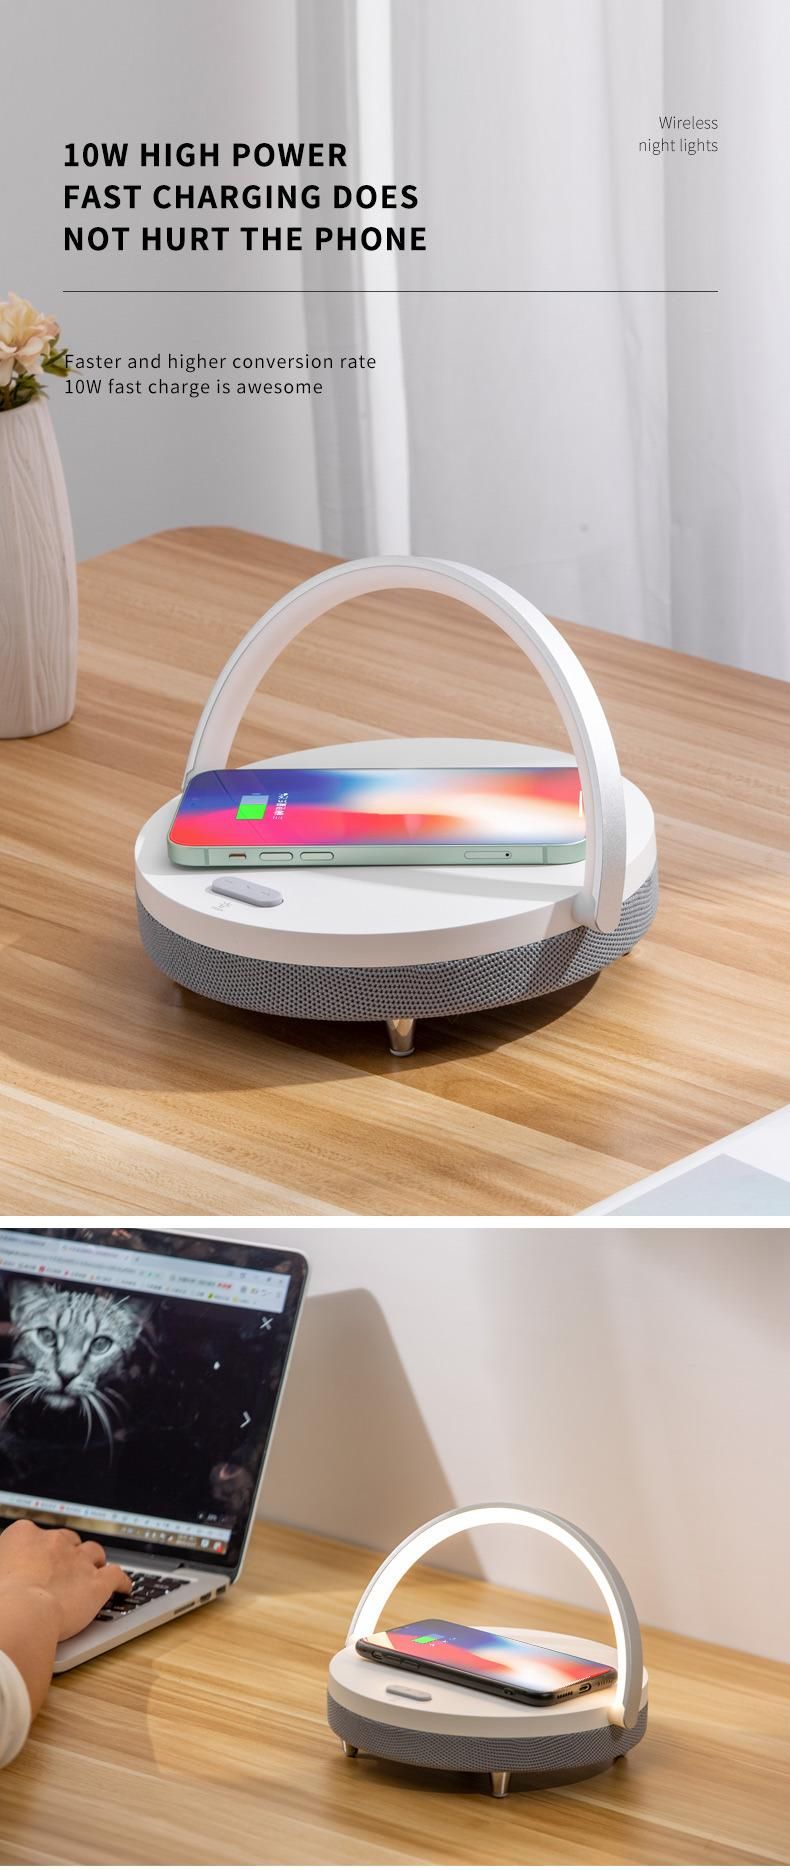 2021 Hot New 15W 10W LED Desk Lamp with Phone Wireless Charger Wireless Phone Charger Lamp Bt Speaker